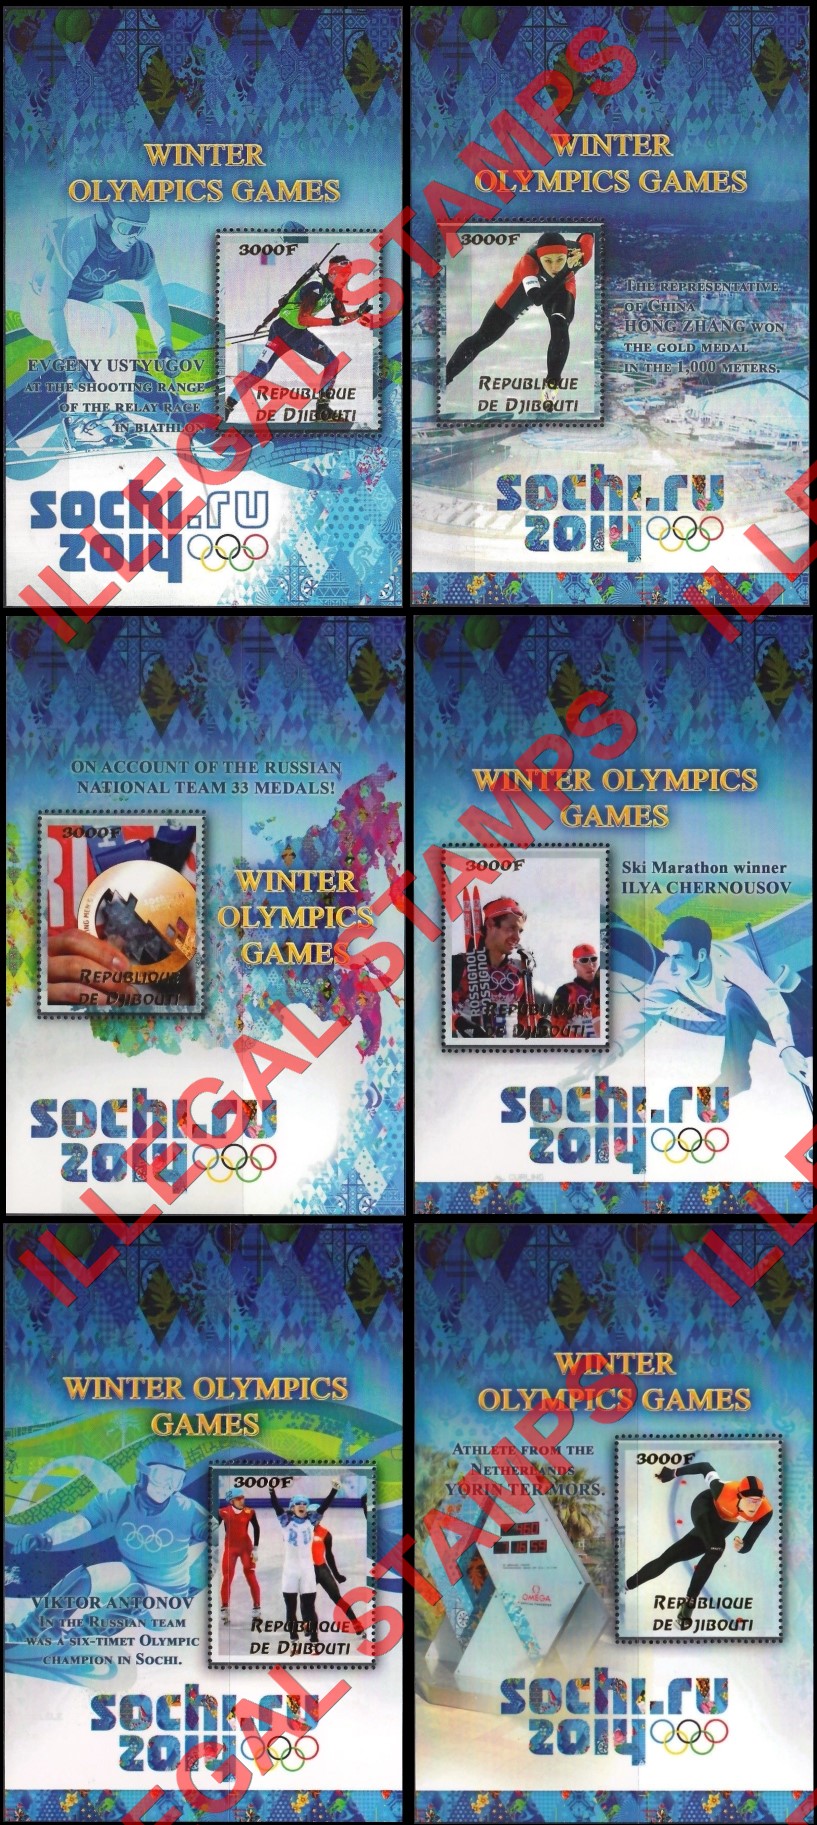 Djibouti 2014 Winter Olympic Games Illegal Stamp Souvenir Sheets (Part 2)